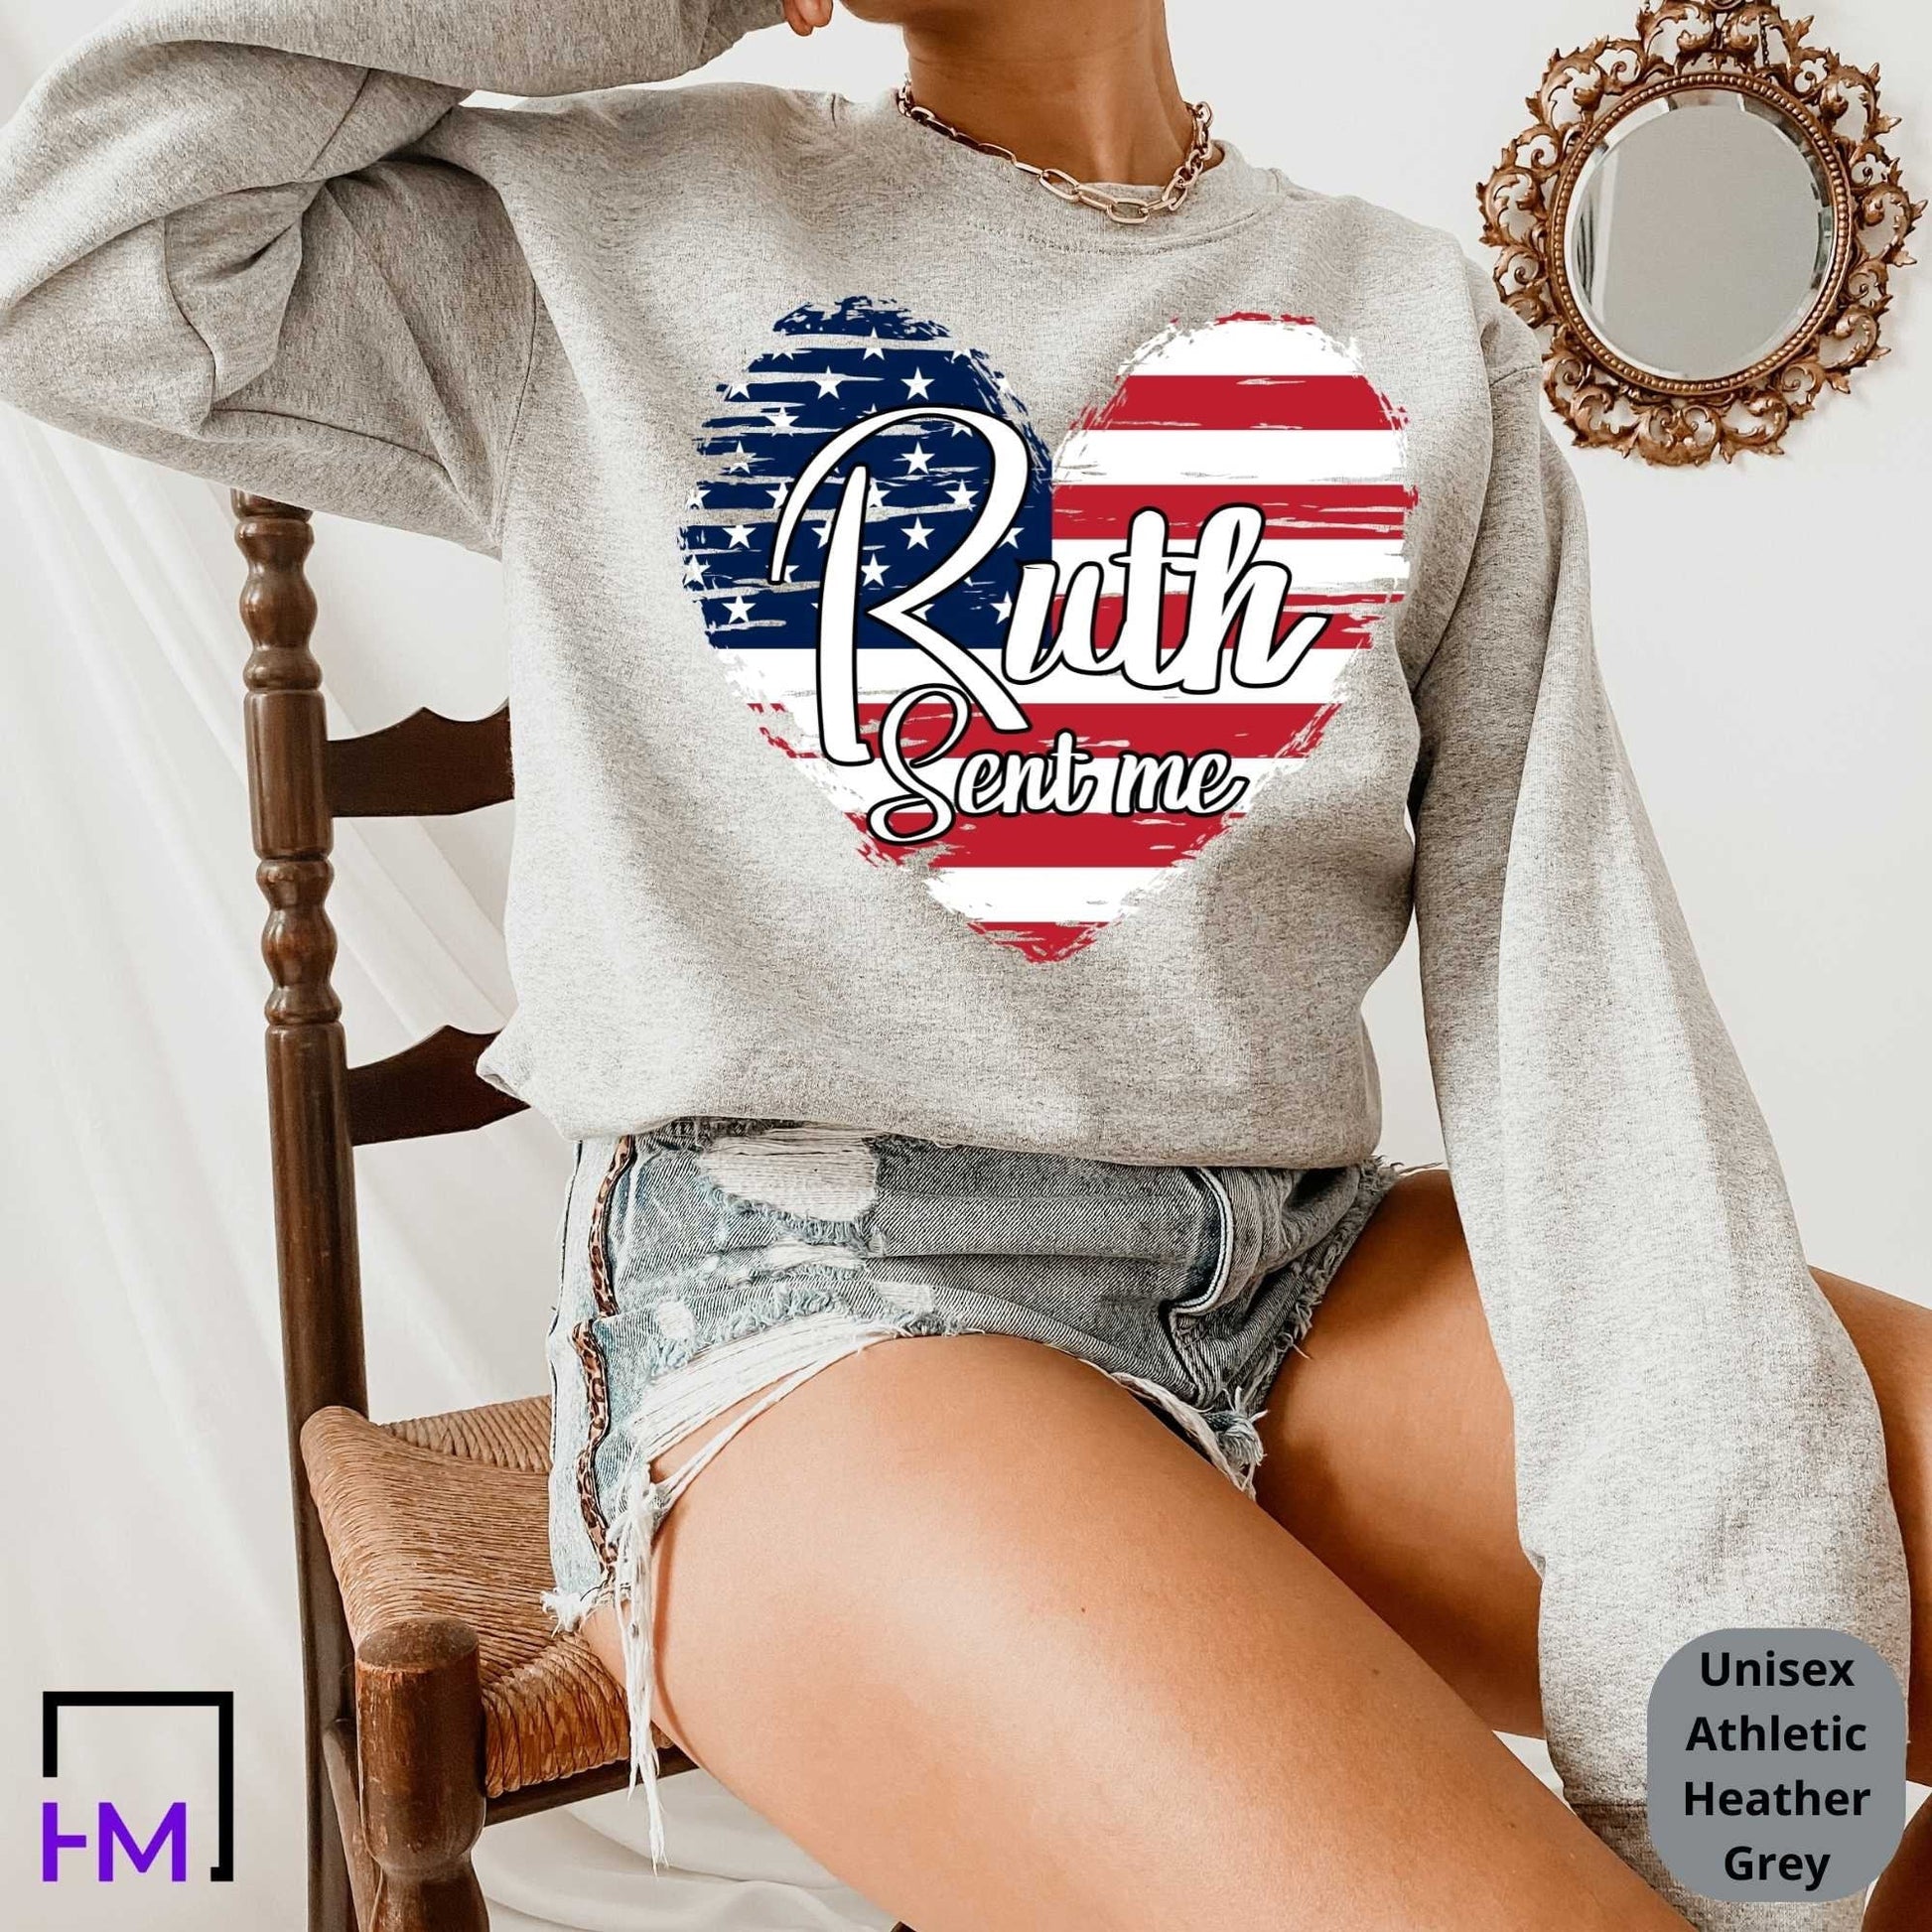 Ruth Sent Me Shirt| Vote For Women's Equality, Human Rights, Reproductive, Feminism, Feminist Election, Political Tops, Tees & Sweatshirts HMDesignStudioUS